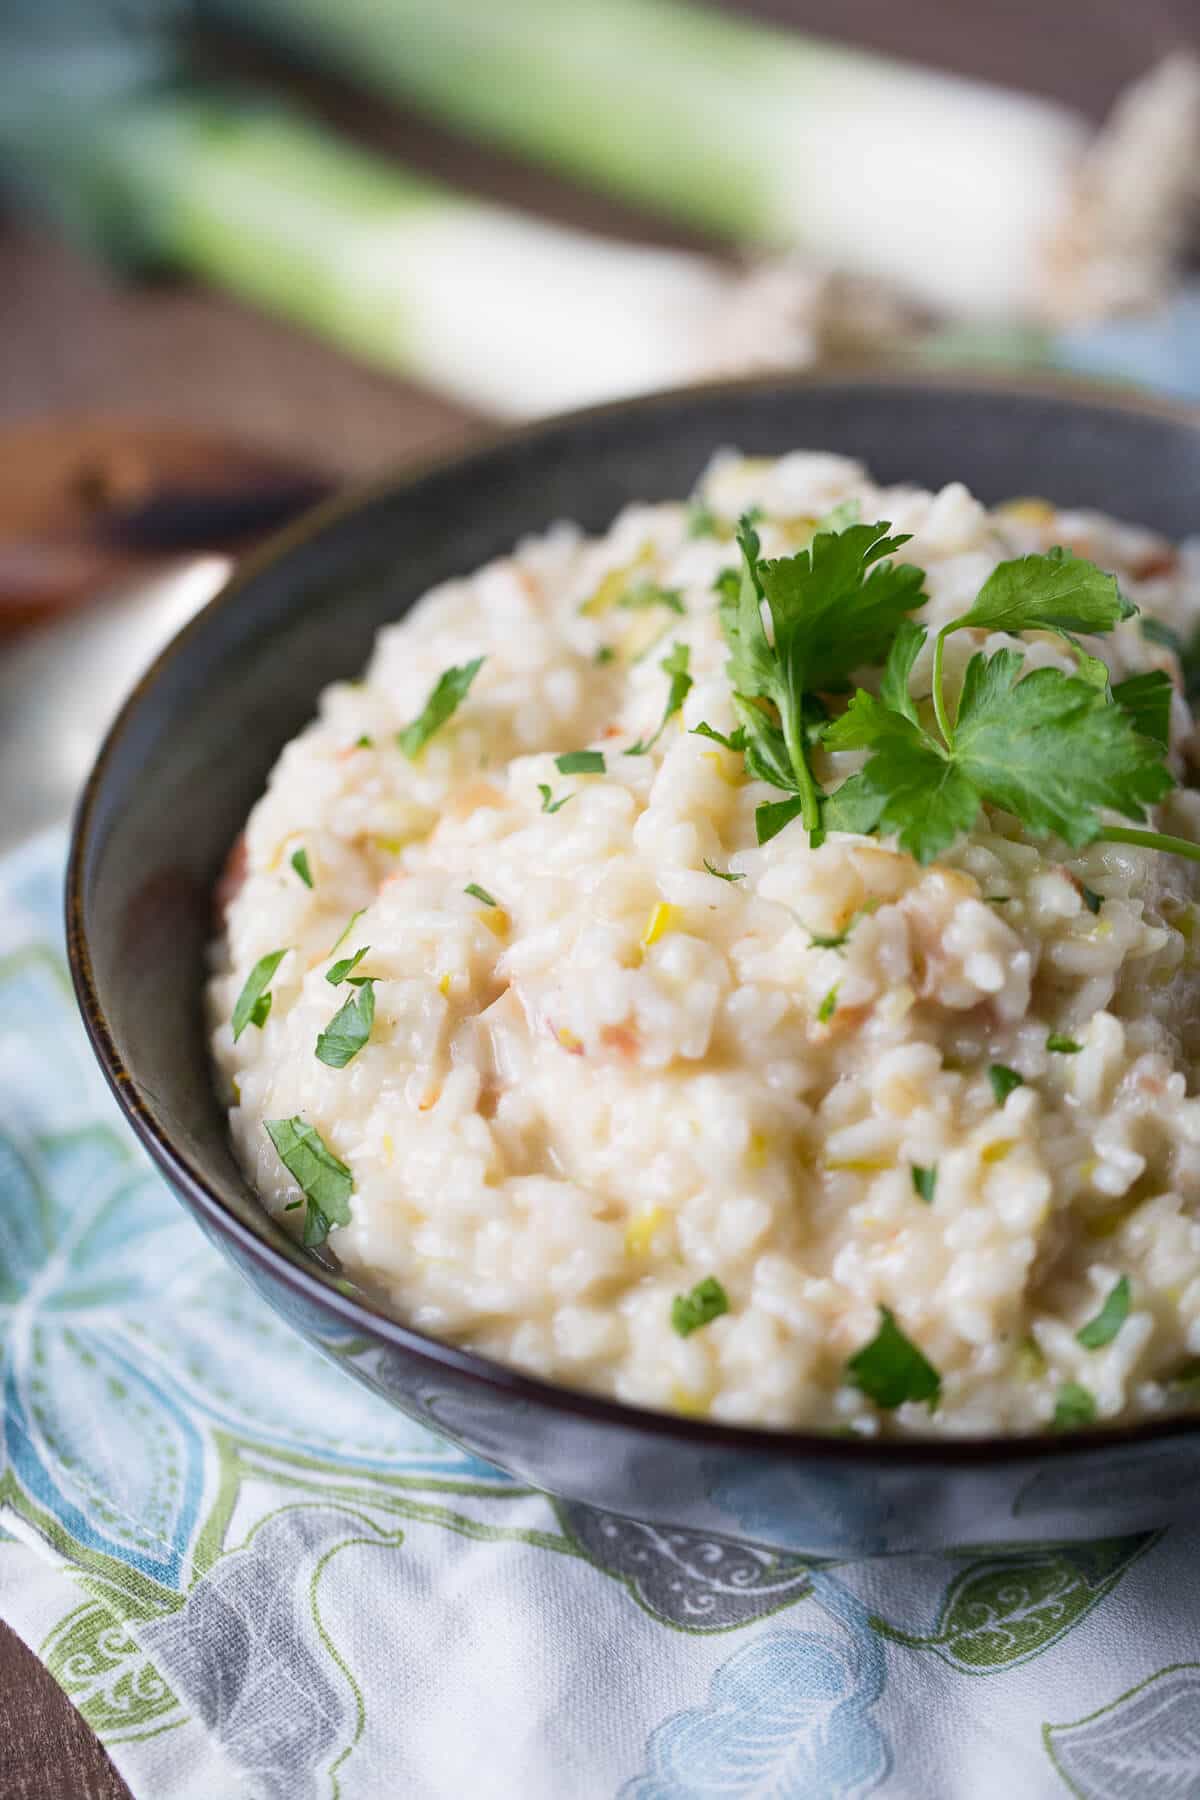 This bacon risotto is going to change how you do sides! Risotto seems intimidating but it is so easy to prepare!